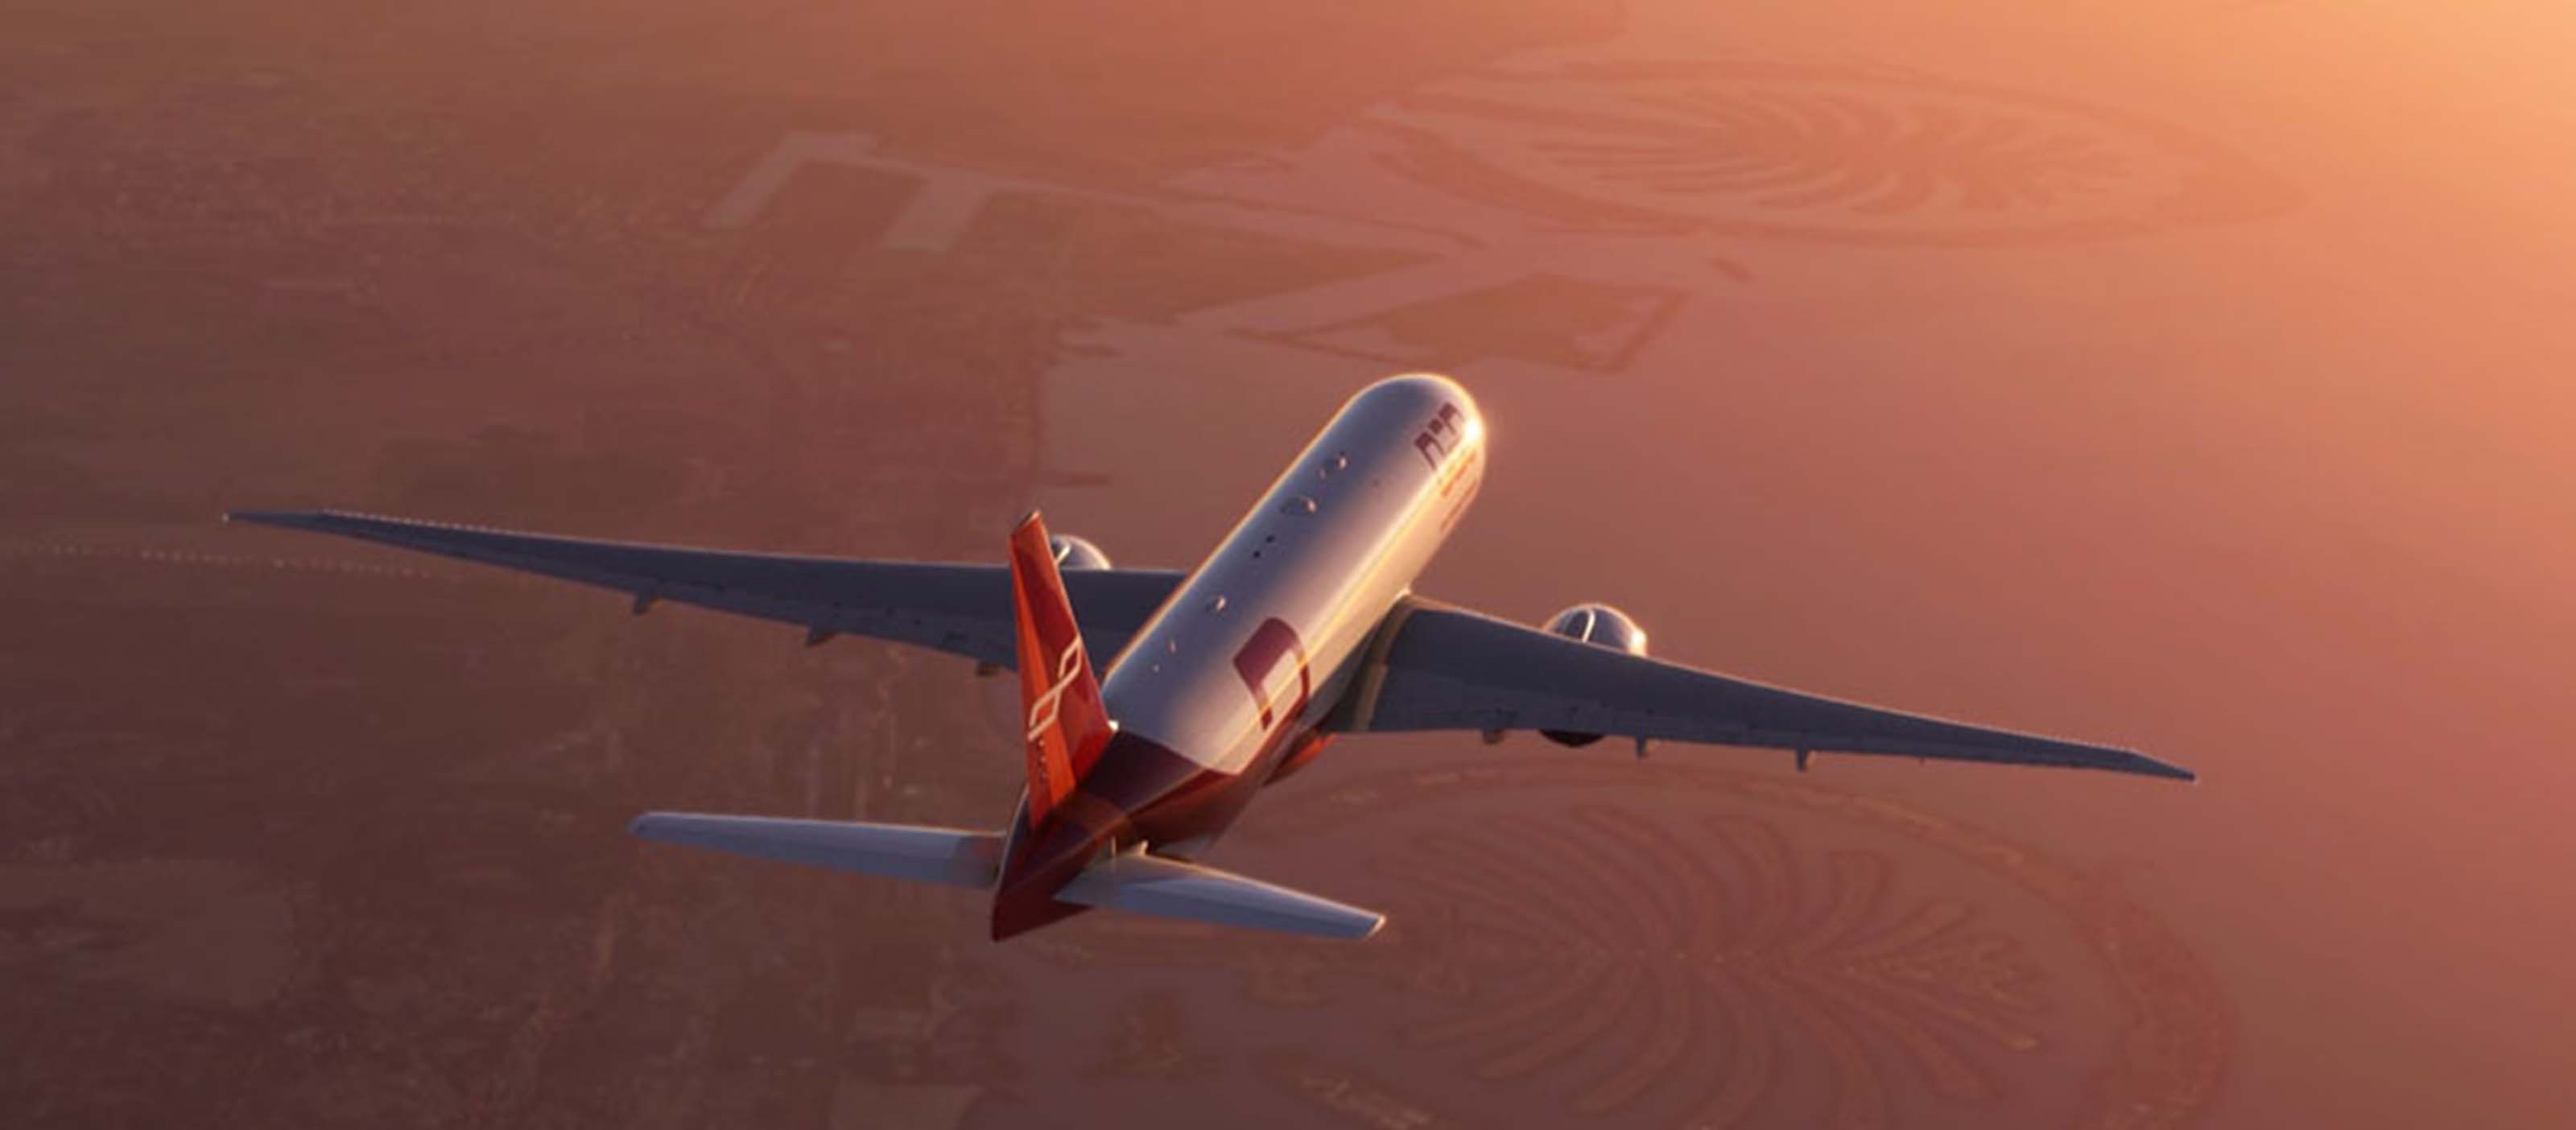 Six Games to Envision the Company Culture You Want - XPLANE